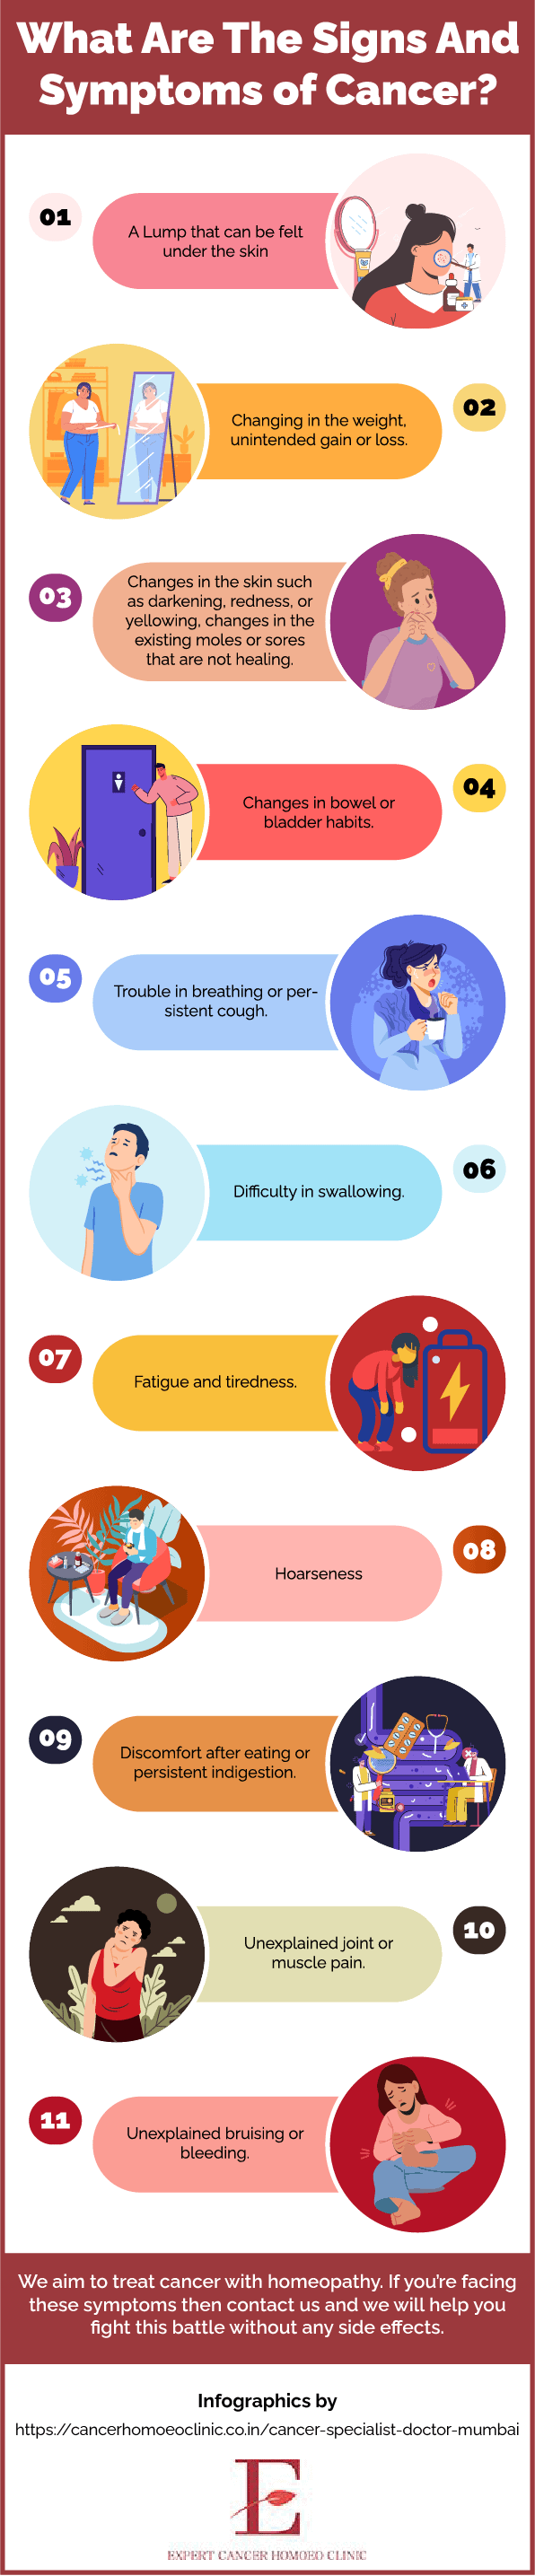 Signs And Symptoms of Cancer